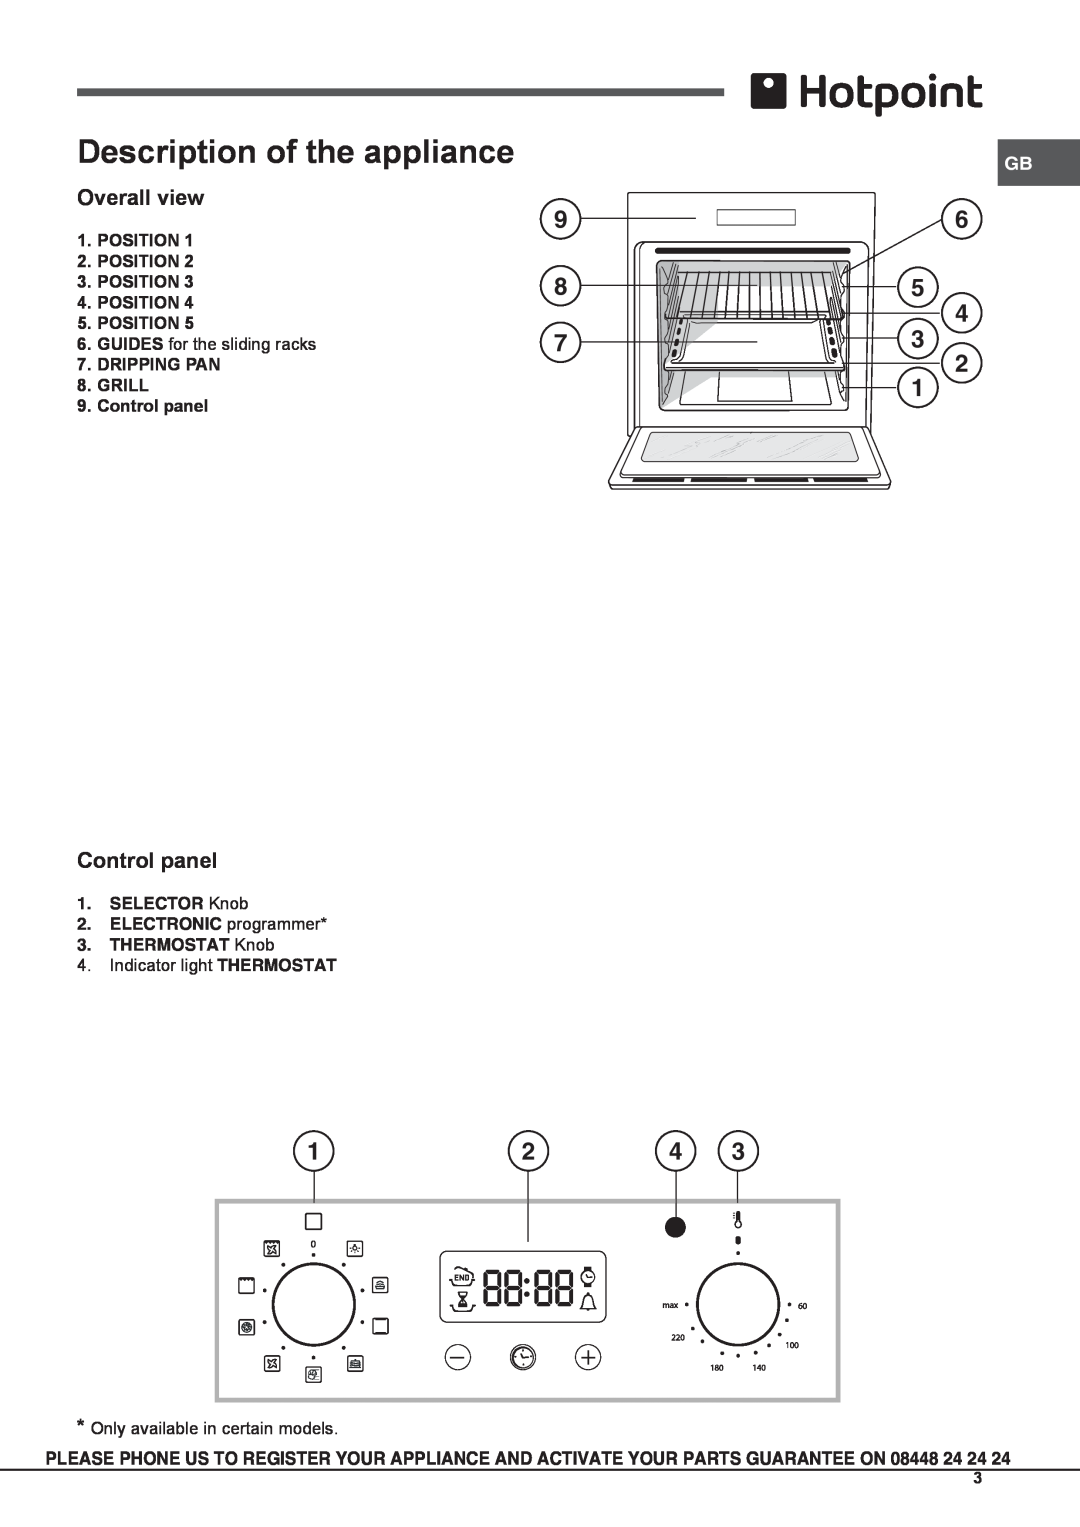 Hotpoint SH83K S Description of the appliance, 6 5, Overall view, Control panel, SELECTOR Knob 2.ELECTRONIC programmer 